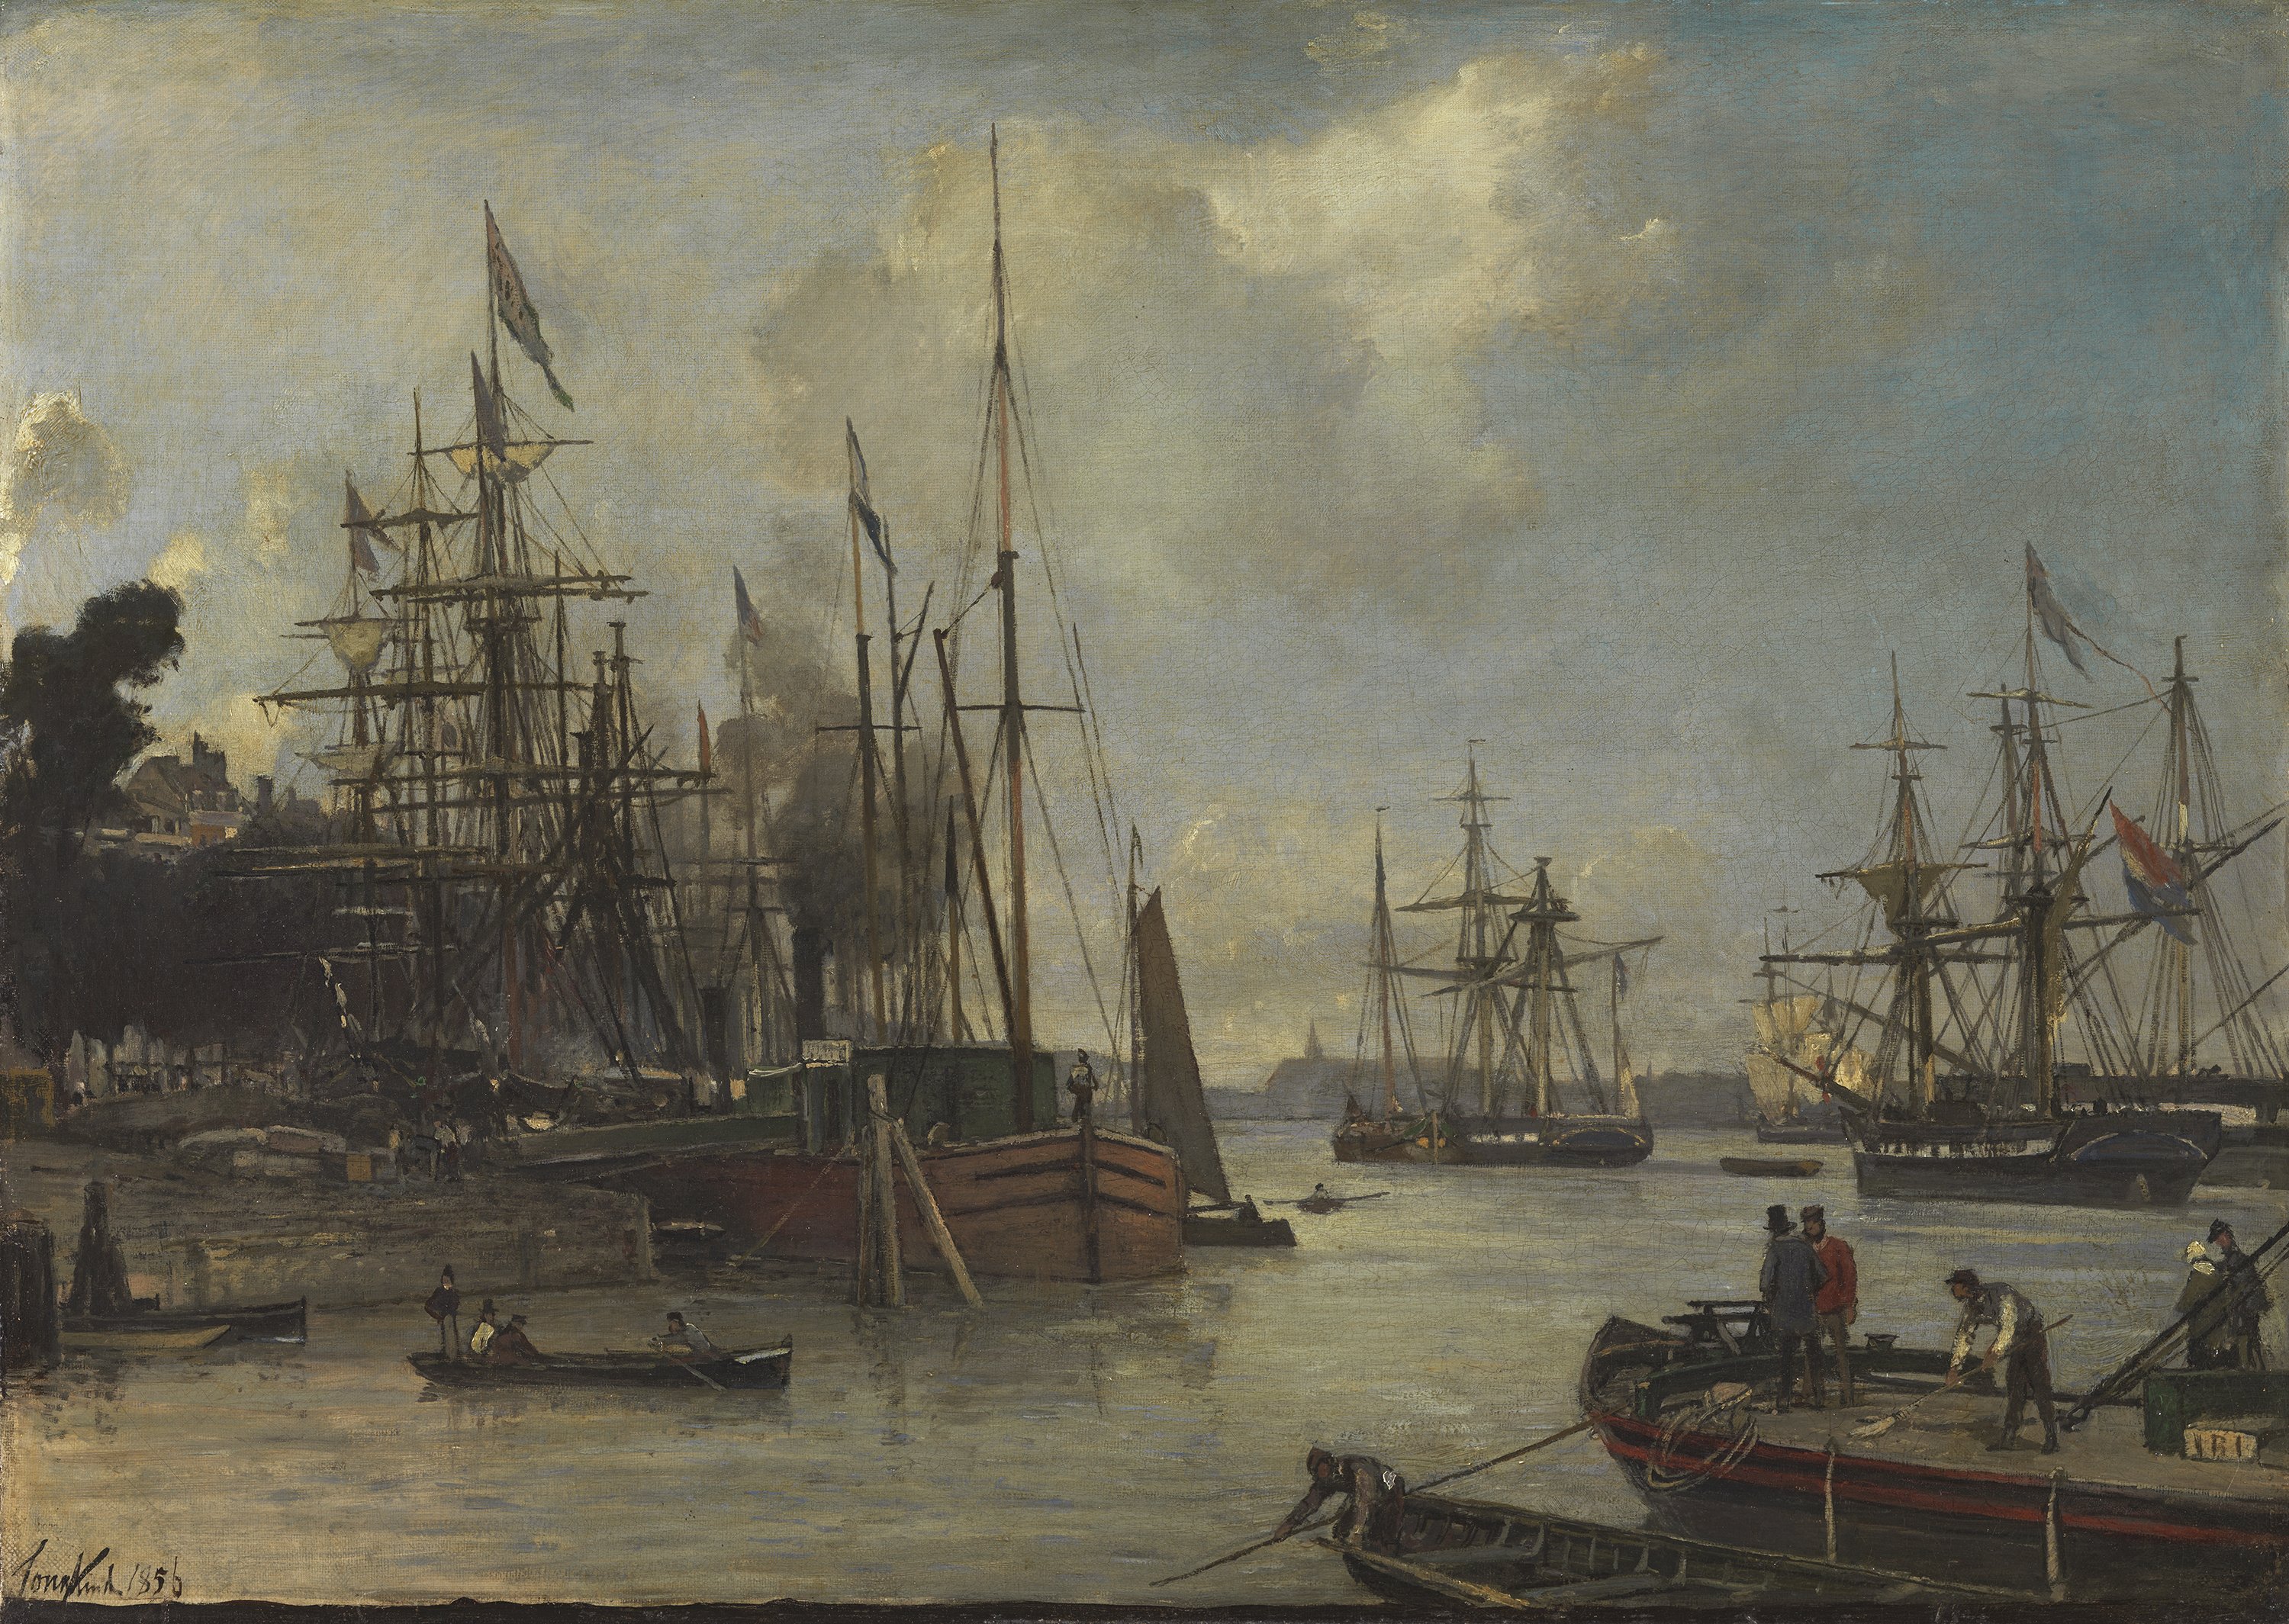 A View of the Harbour, Rotterdam. Johan Barthold Jongkind